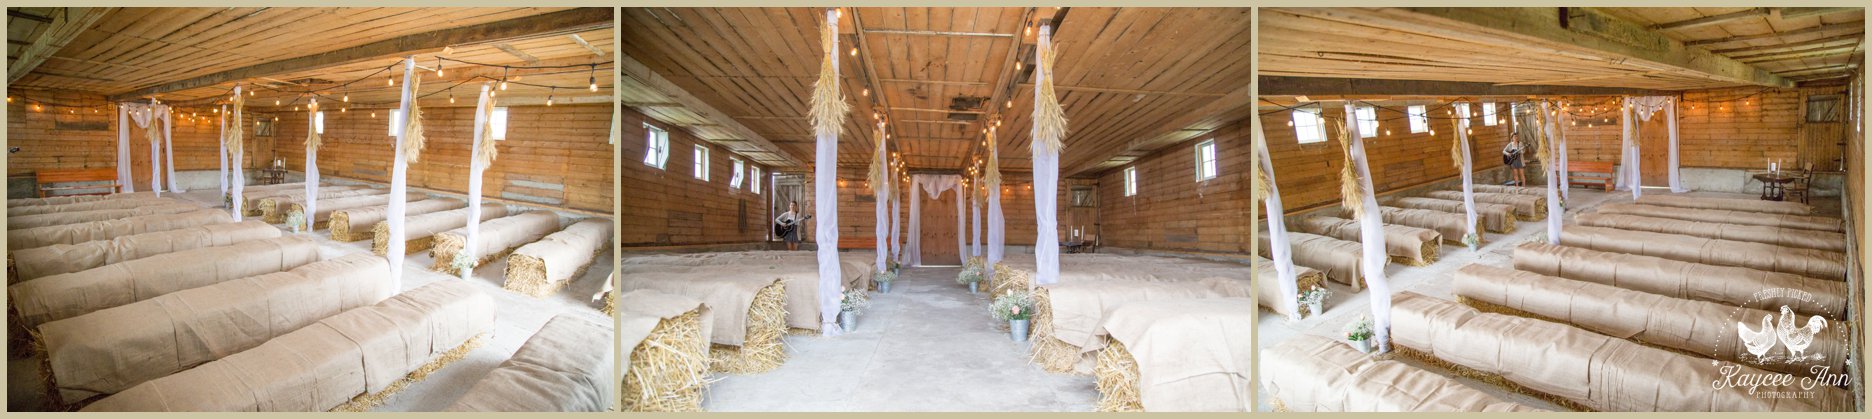 The inside of the barn, barn, hay bales, tulle, light, burlap covers, hay bale, babysbreath, aisle 